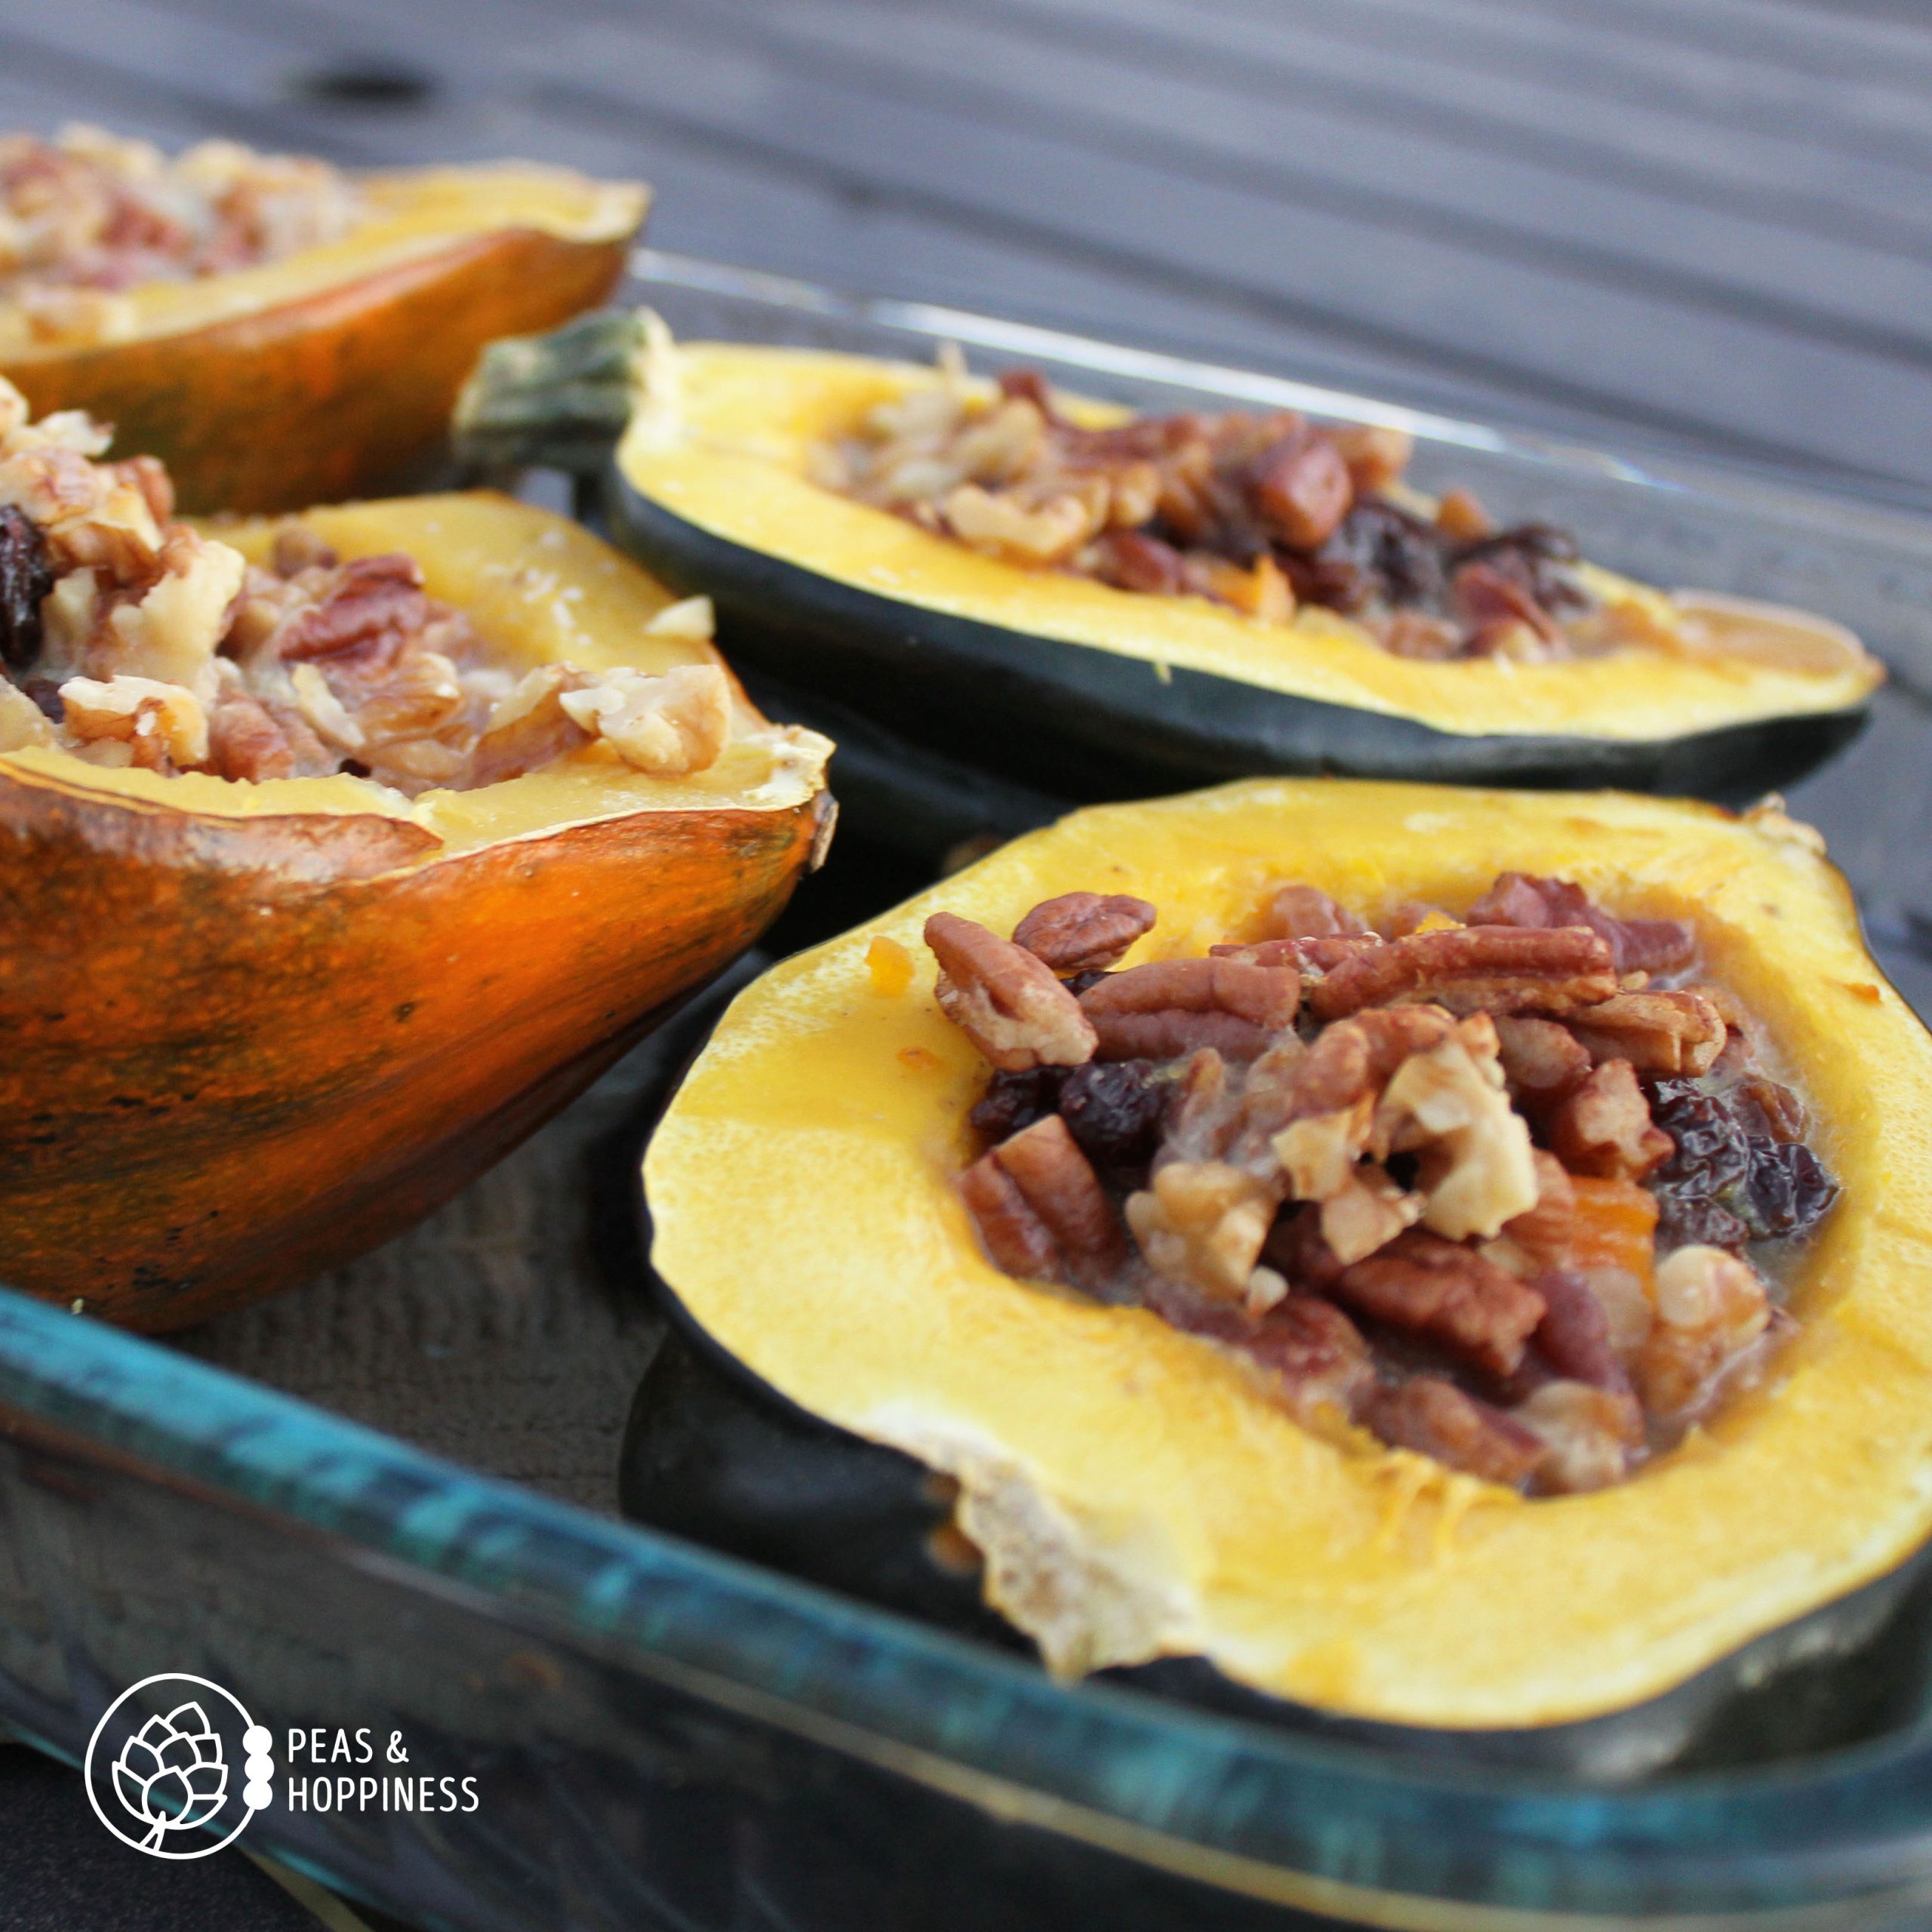 Acorn Squash Stuffed with Dried Fruits and Nuts - Dairy Free Gluten Free Vegan Holiday Recipe from Peas and Hoppiness